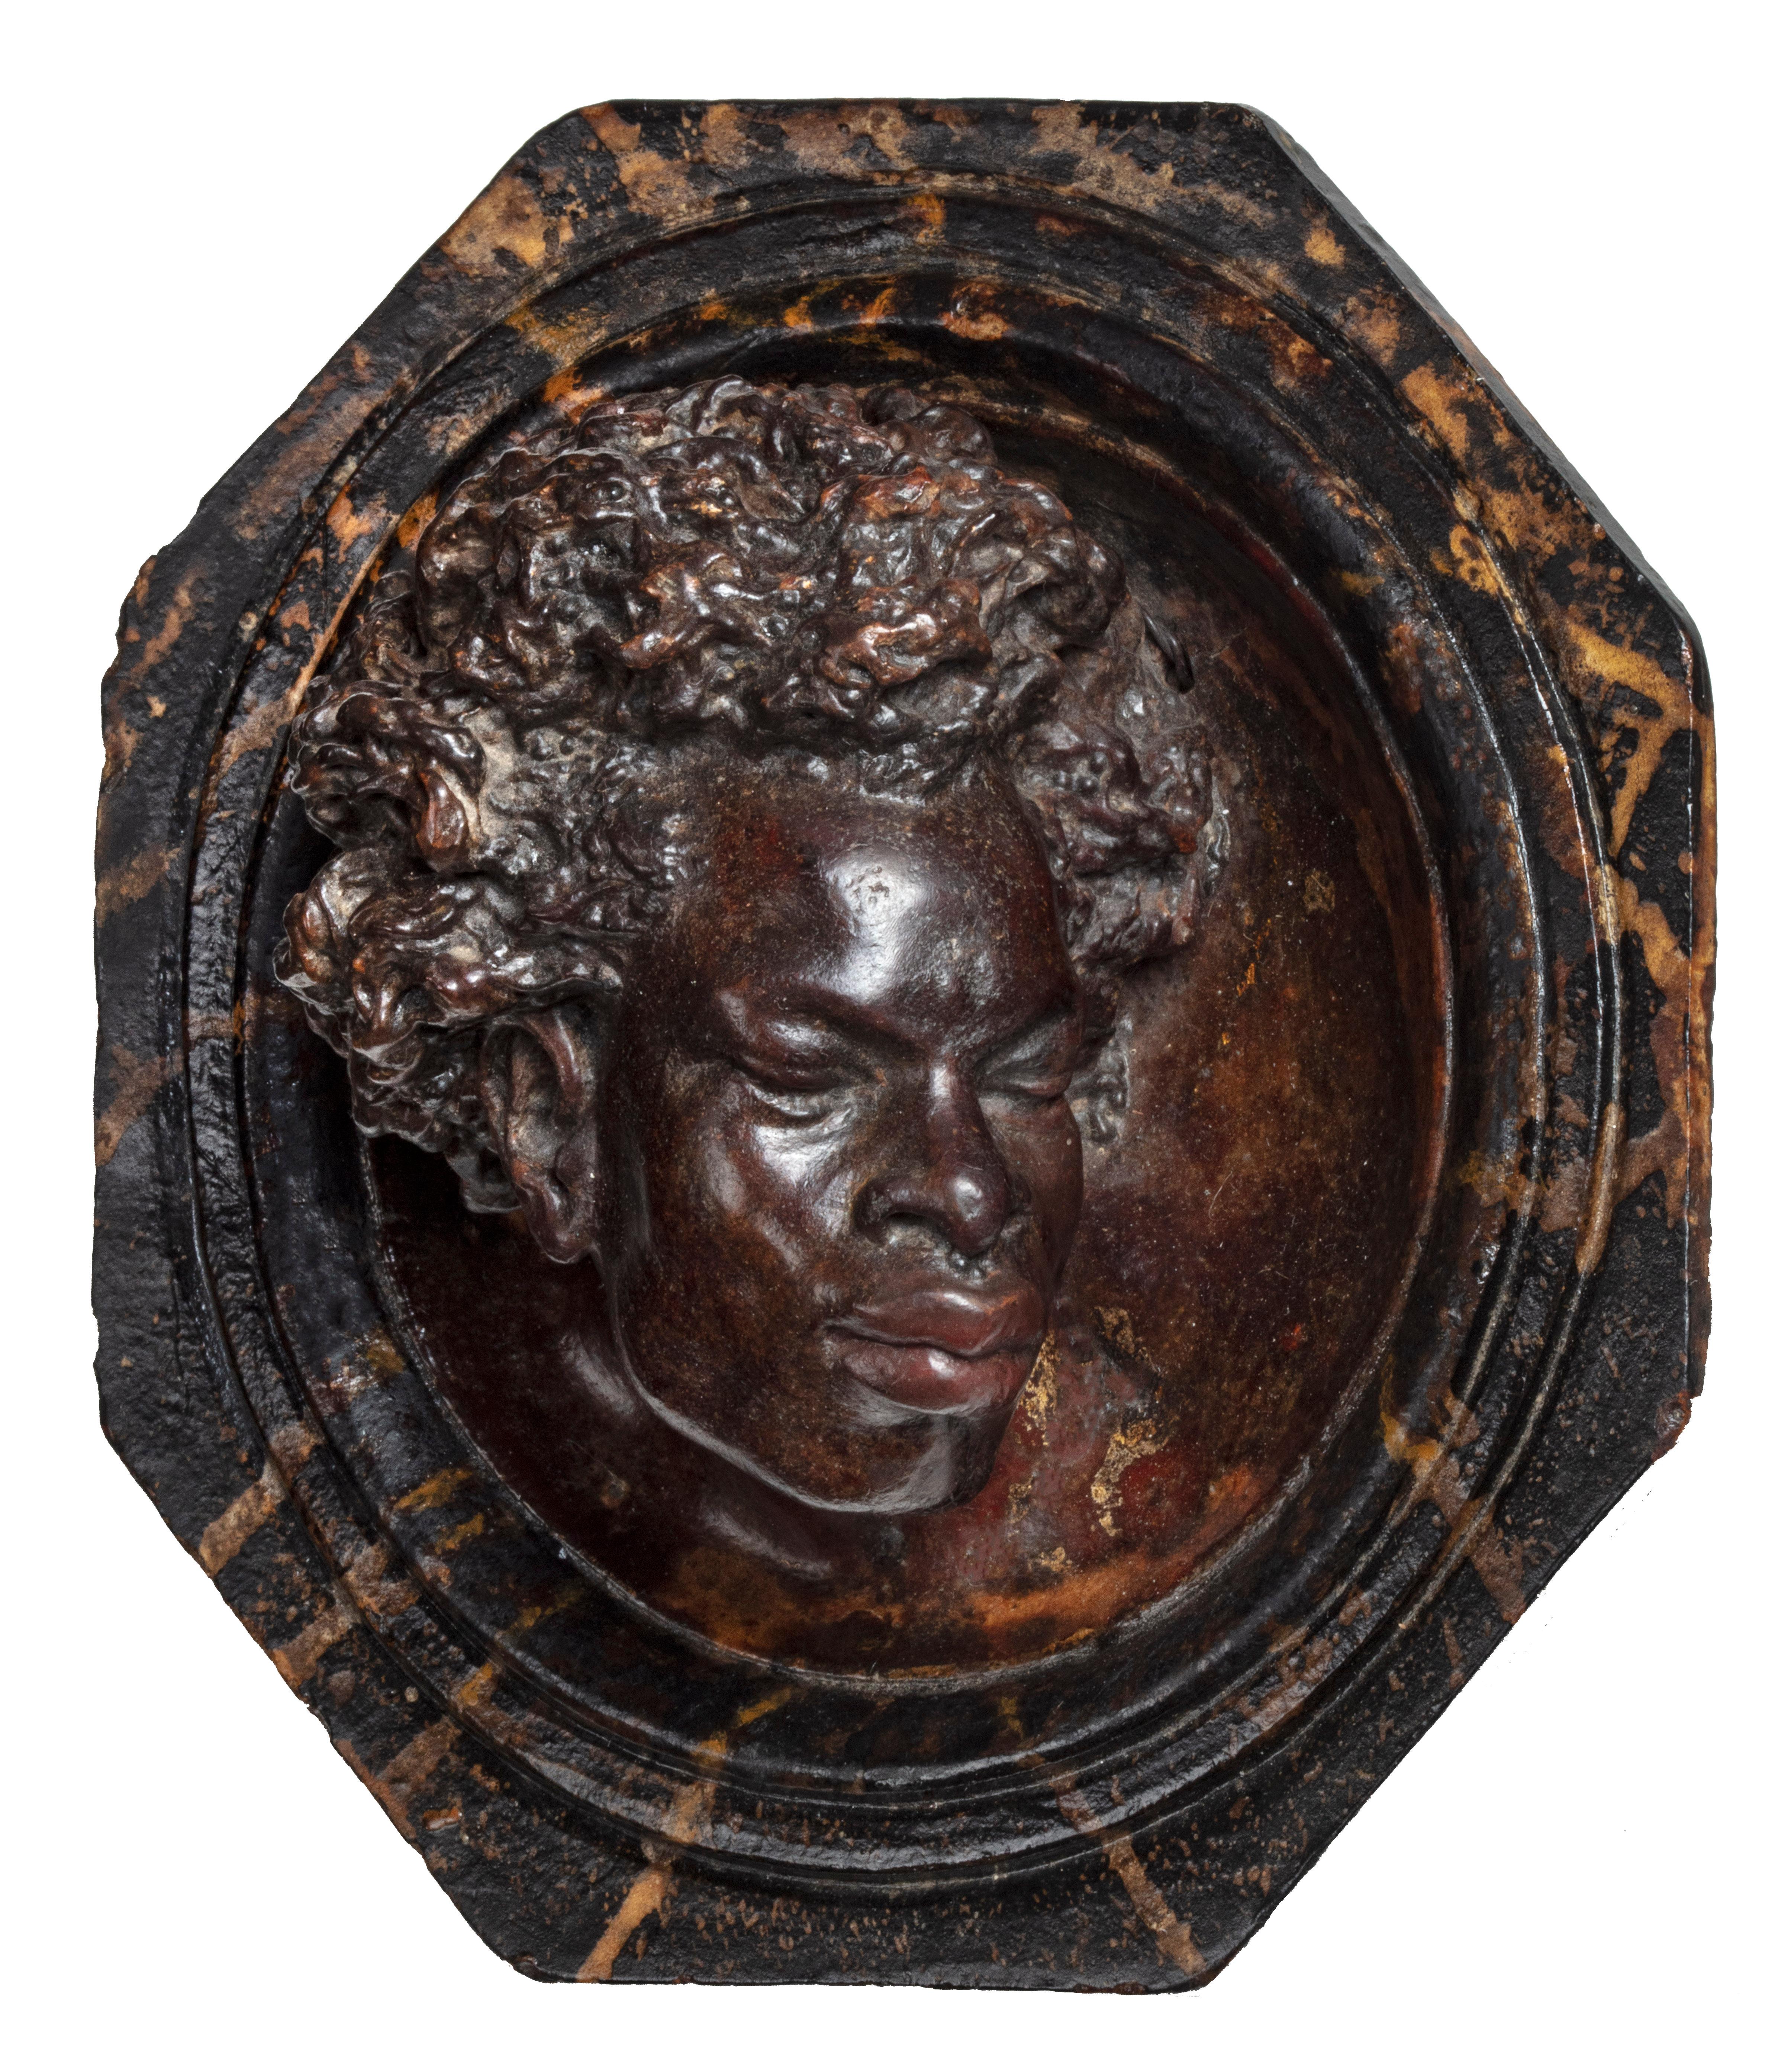 Head of a Young African Man - Sculpture by Italian School, ca. 1800